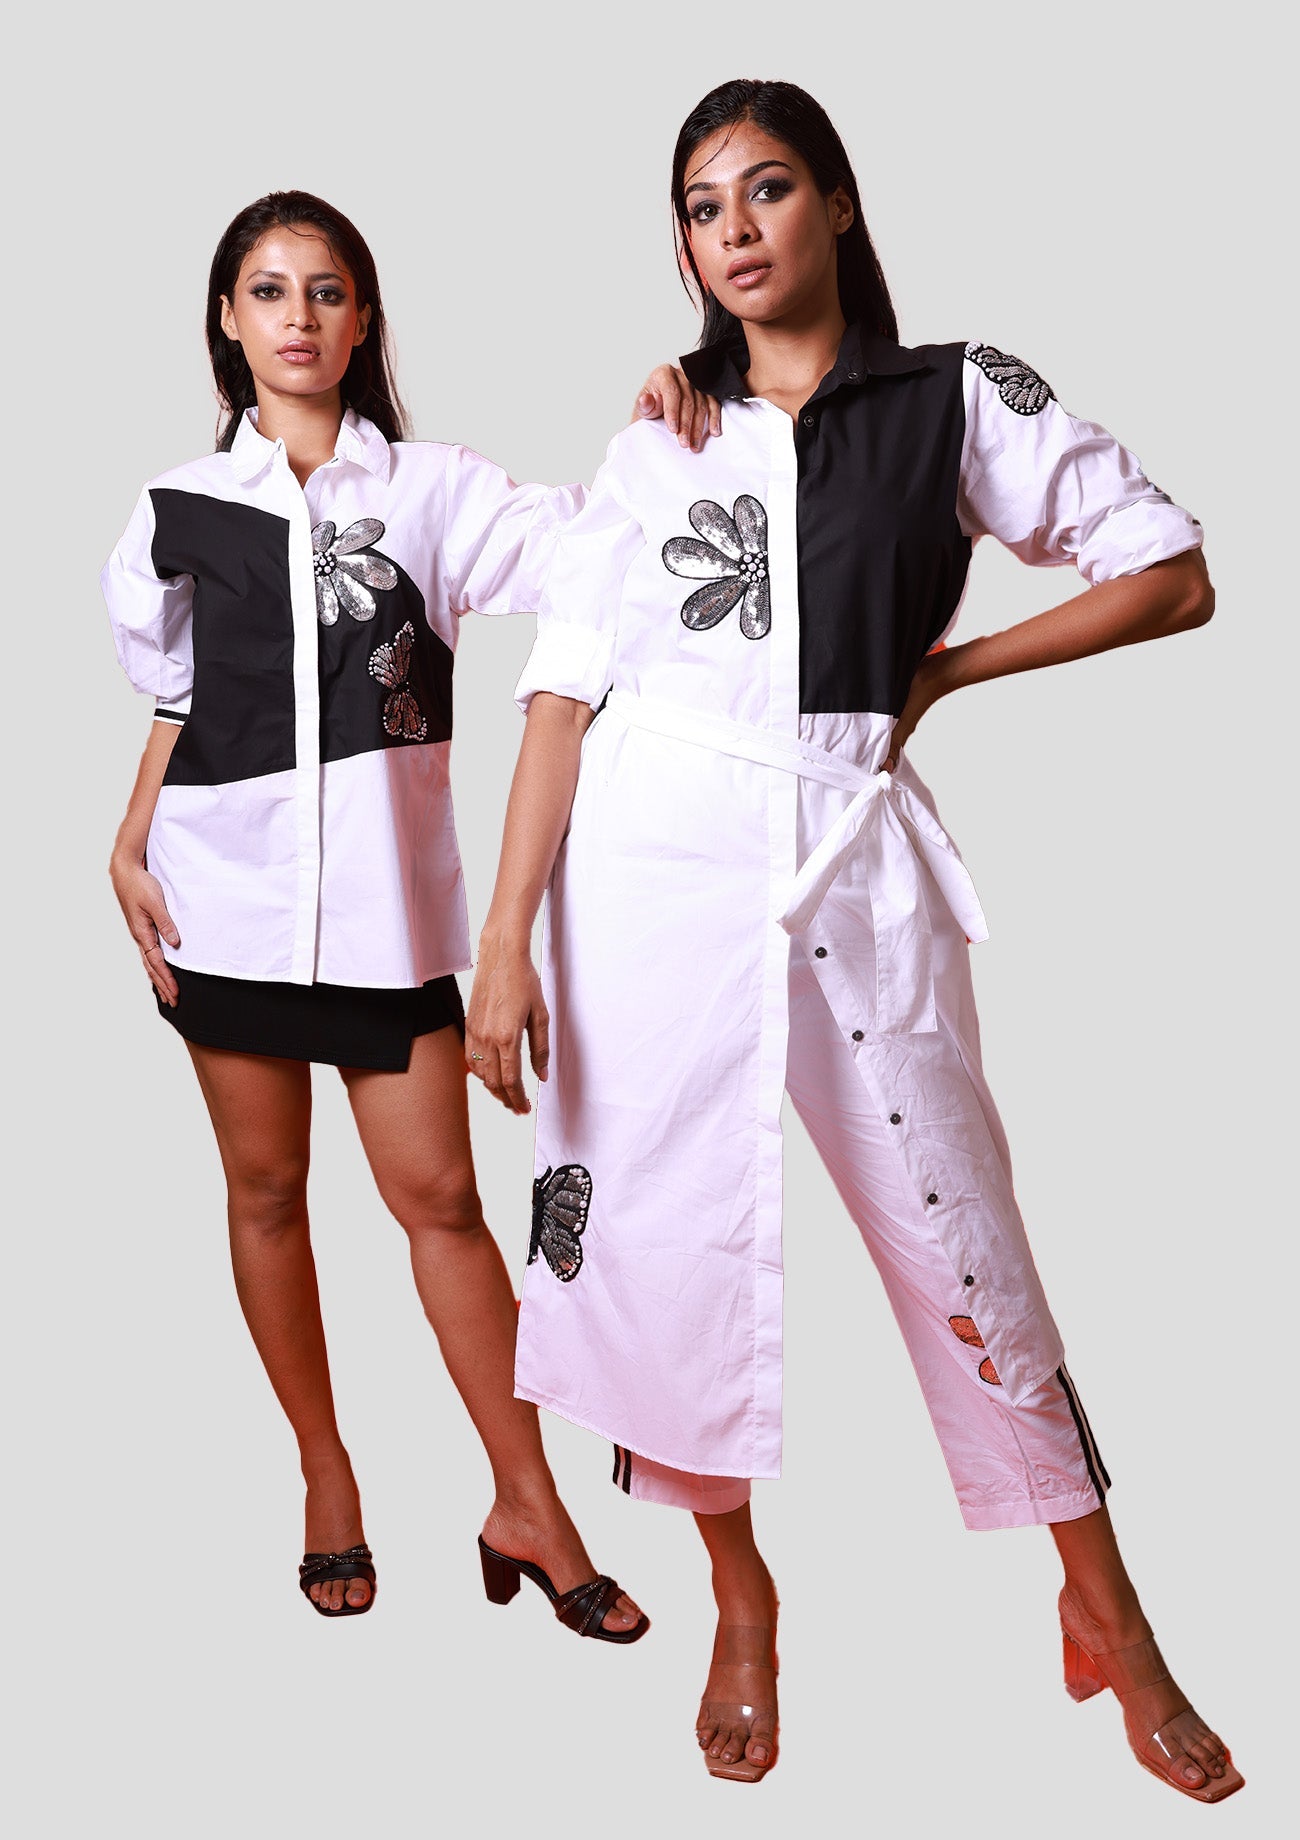 White Cotton Shirt With Black Back, Black Triangular Block With Silver Flower & Butterfly Embroidery